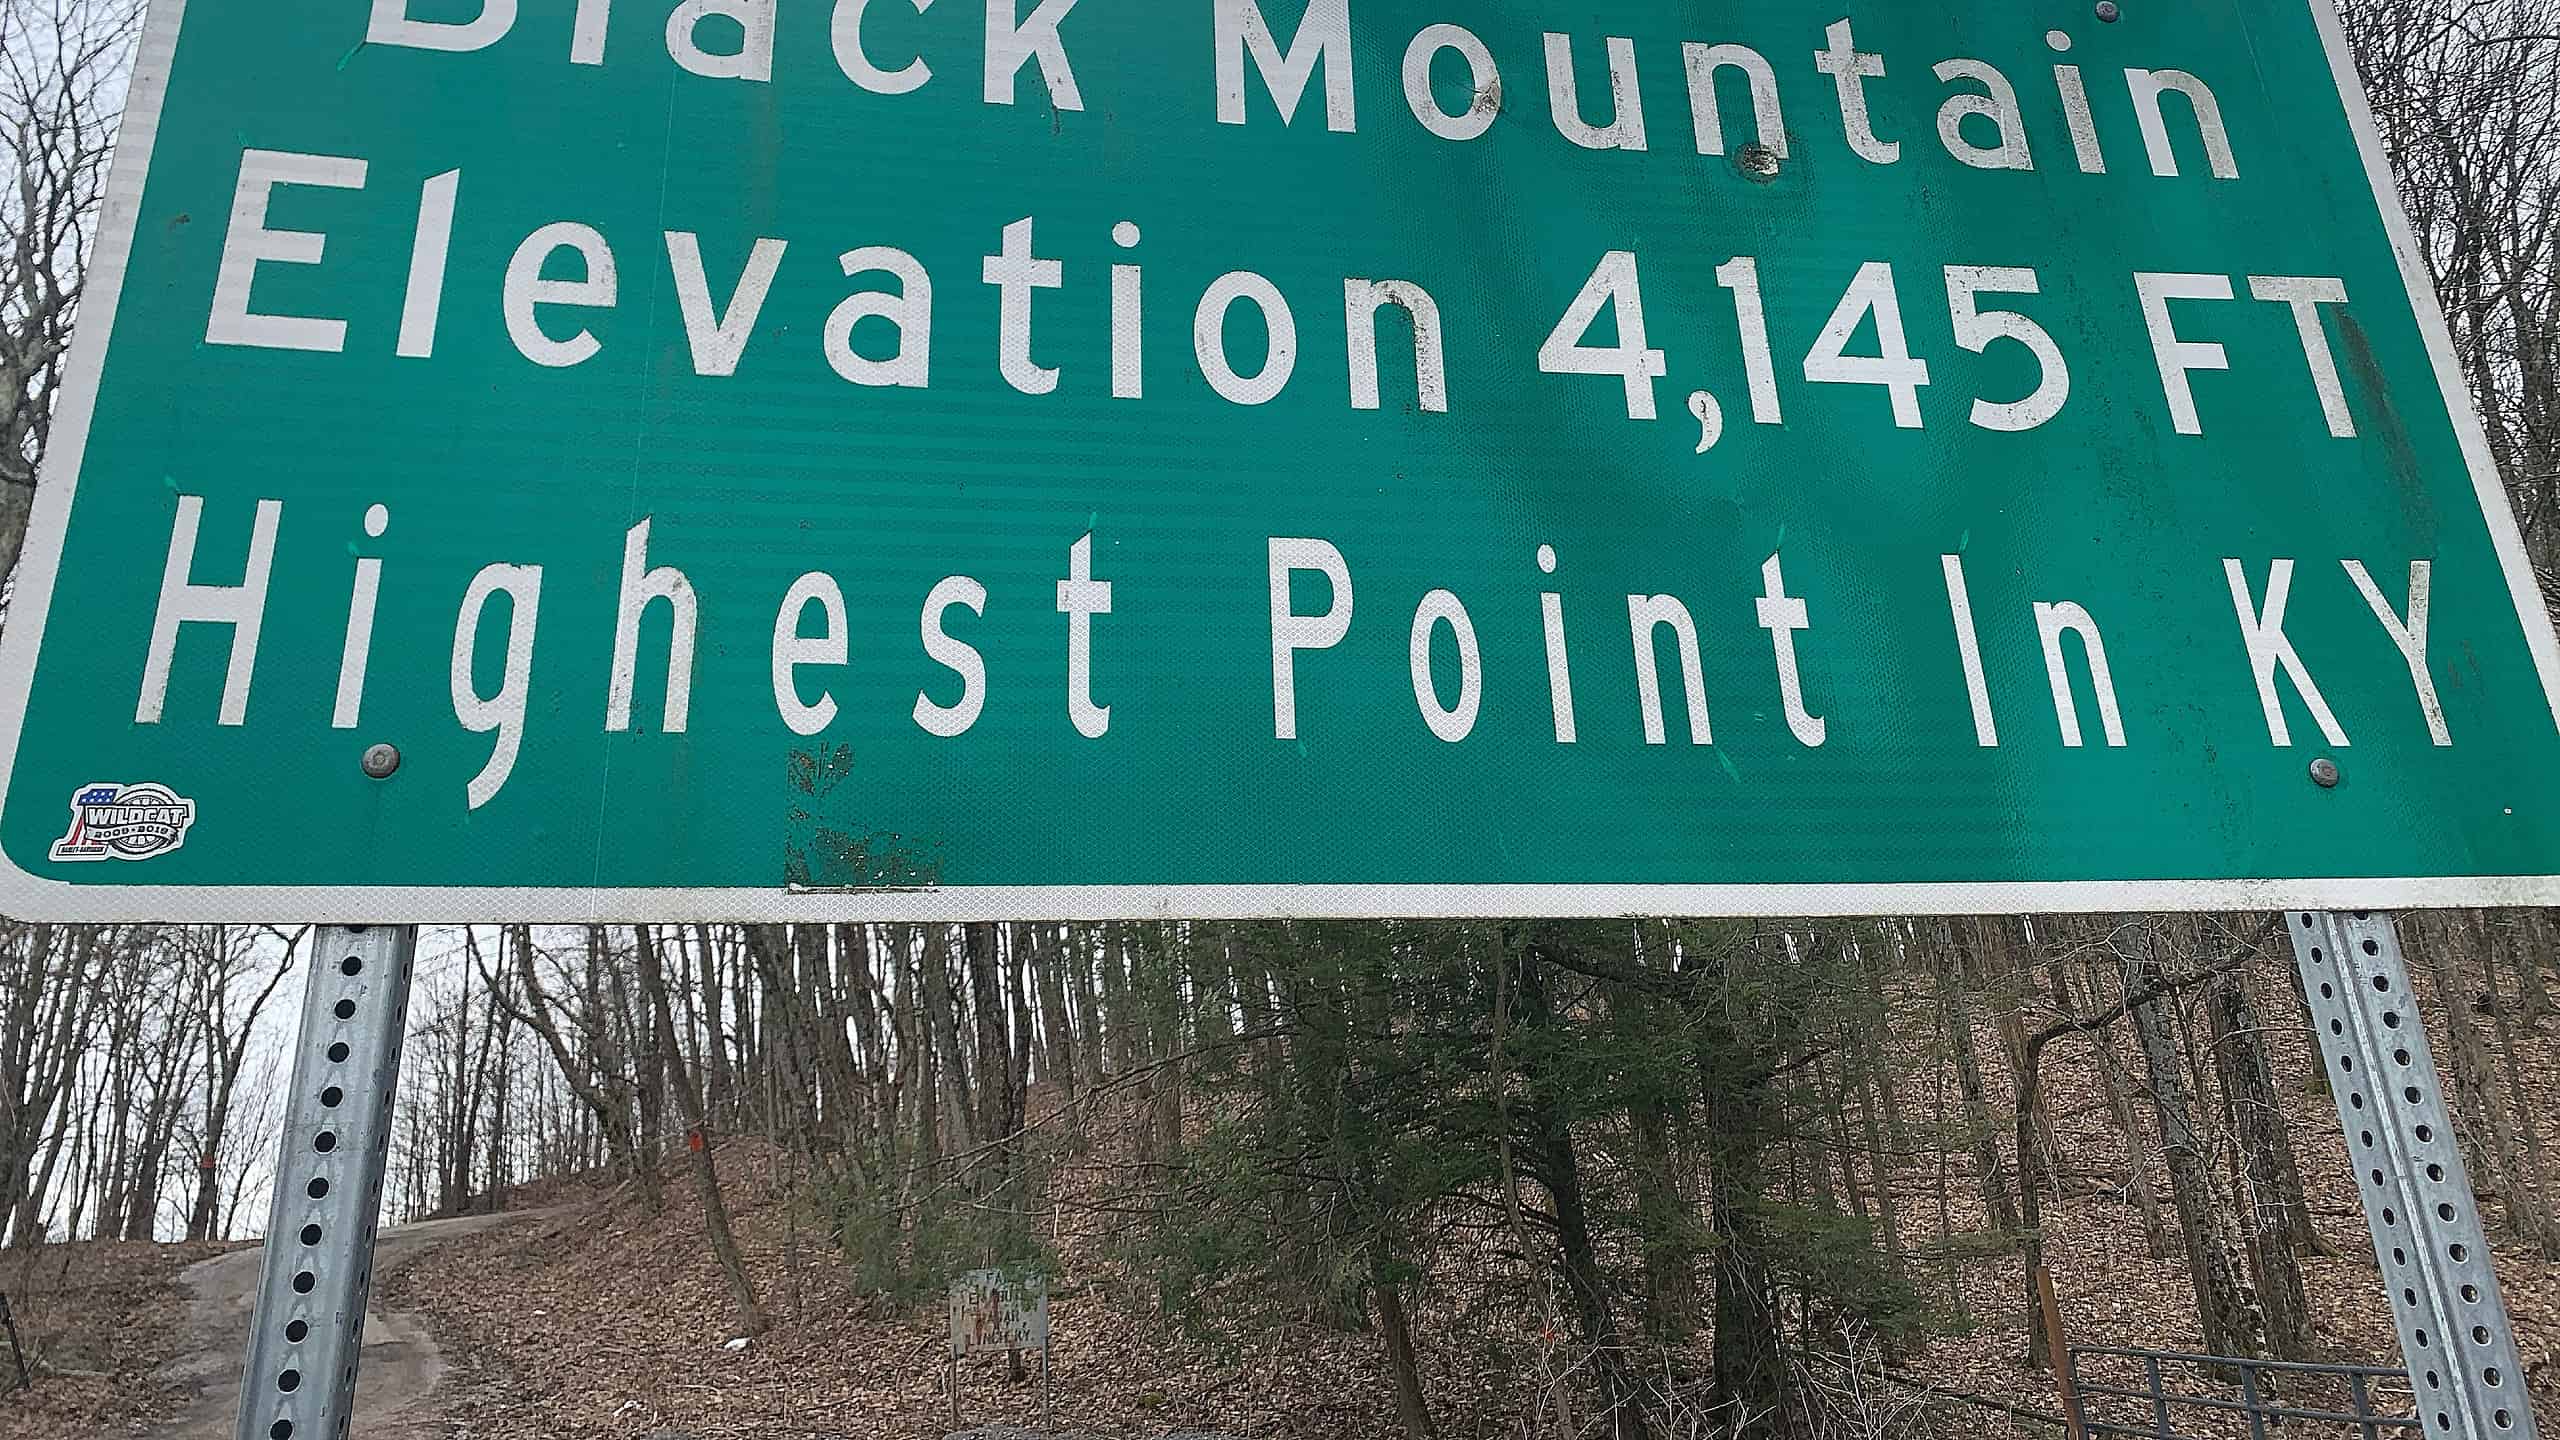 Sign showing Black Mountain elevation